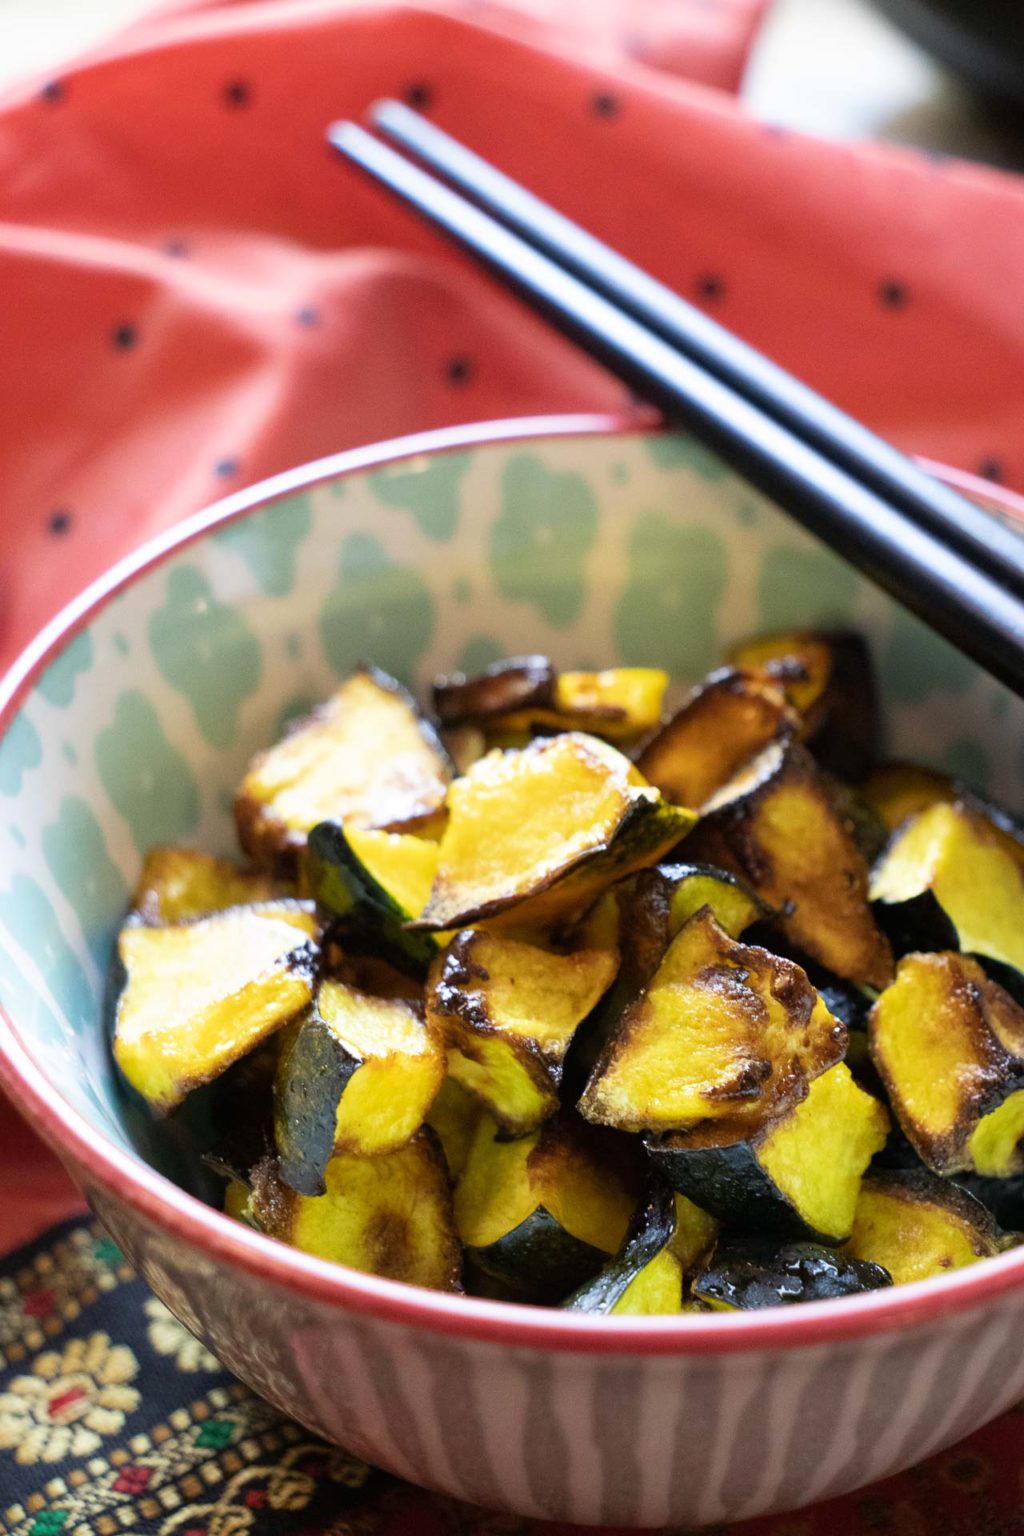 Honey glazzed roasted acorn squash cubes in bowl with chopsticks